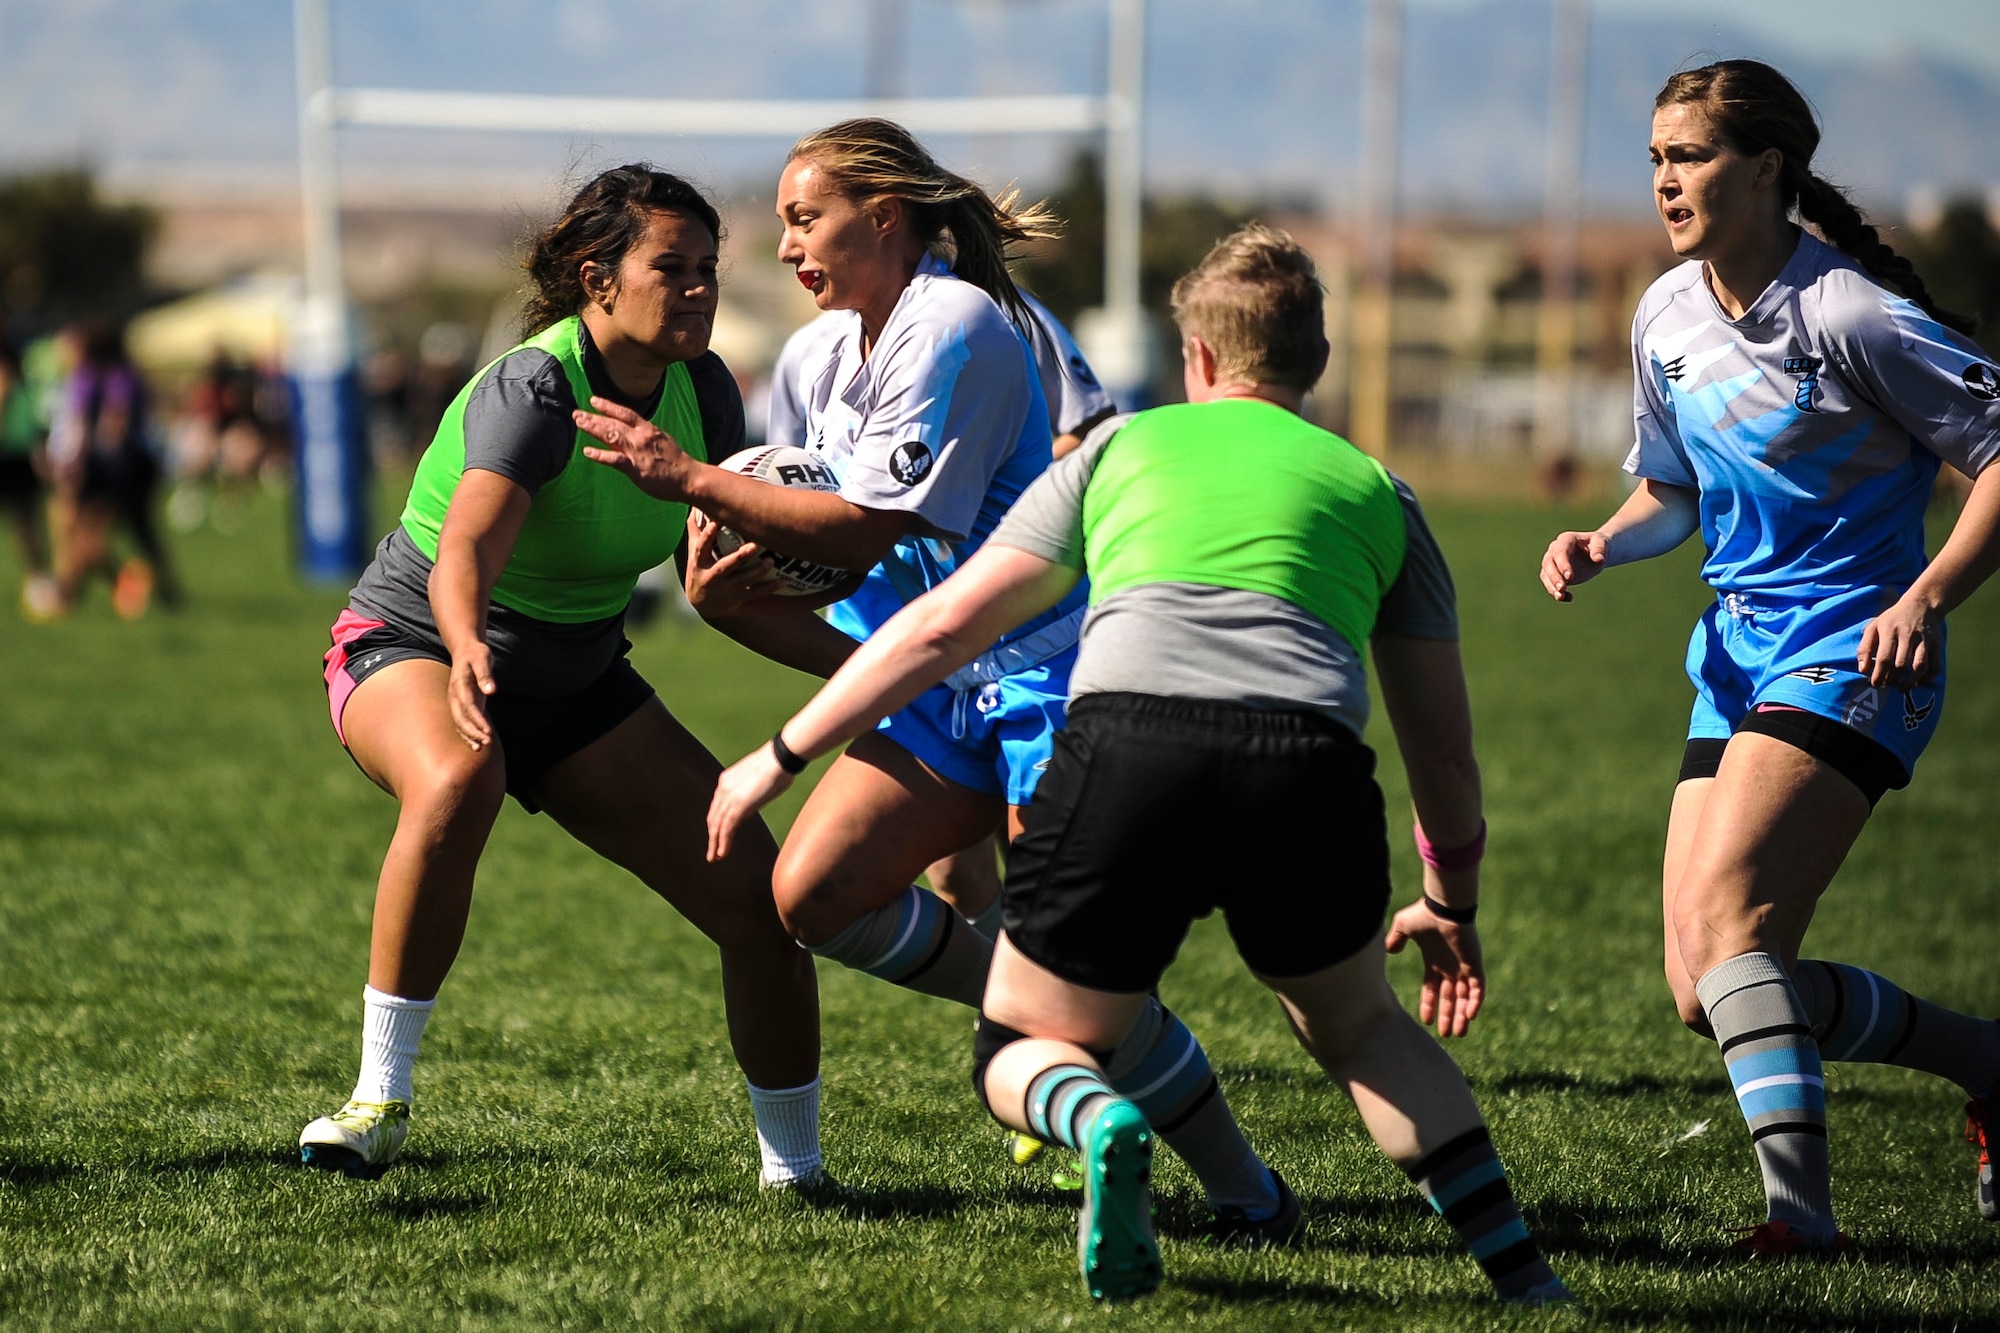 Leanne Hardin, a wing on the Air Force women’s rugby sevens team, runs with the ball during a Las Vegas Invitational match in Las Vegas, March 2, 2017. Hardin, a staff sergeant stationed at Pápa Air Base, Hungary, played multiple sports growing up and was encouraged by a coworker who played on the men’s team to give rugby a try. (U.S. Air Force photo by Staff Sgt. Siuta B. Ika)